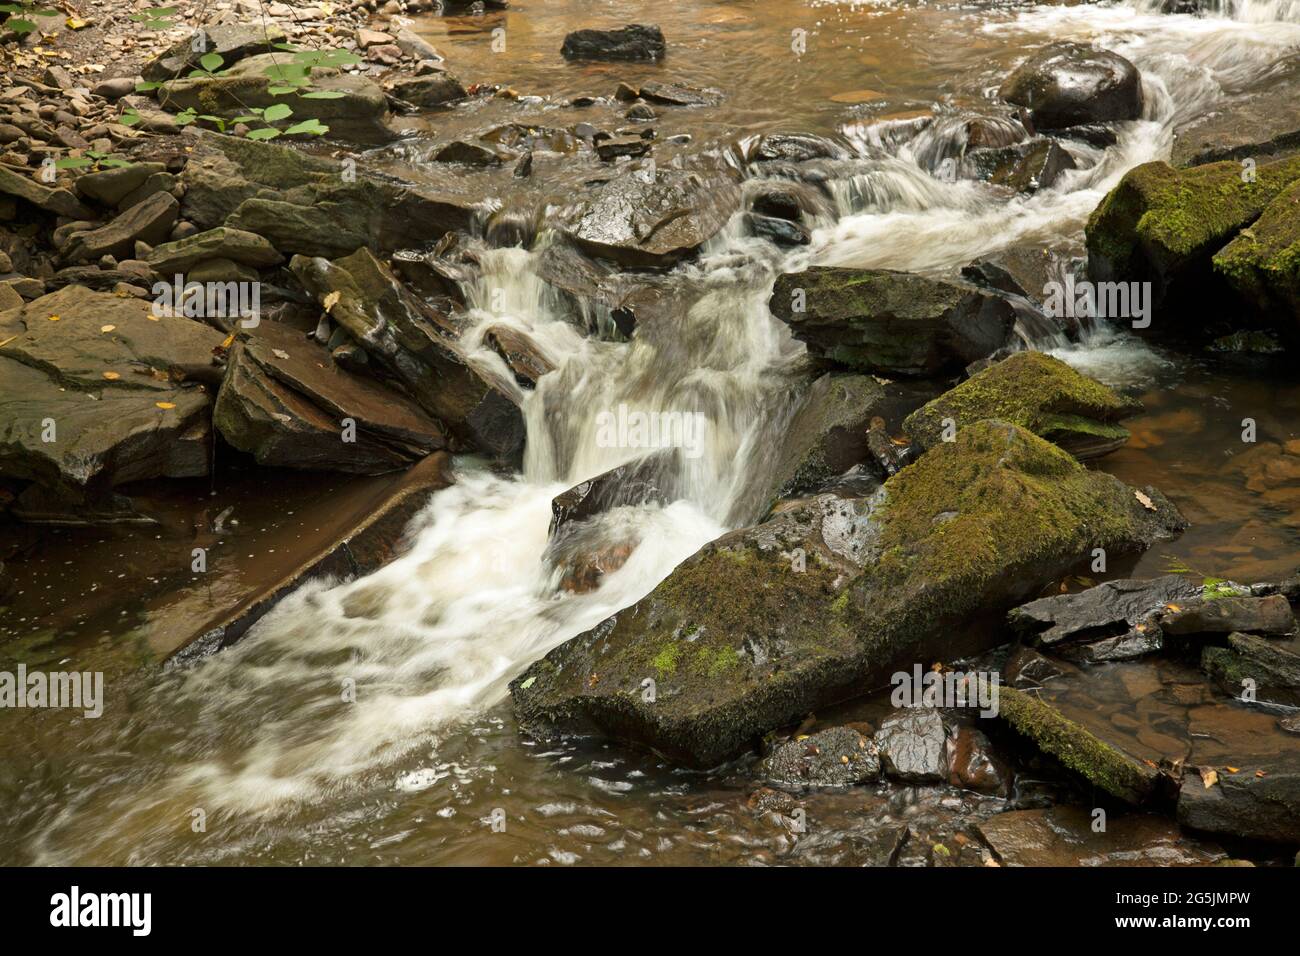 Water flowing over a mini waterfall, Aberdulais, Neath, Wales. Long exposure, to show the motion of the water Stock Photo